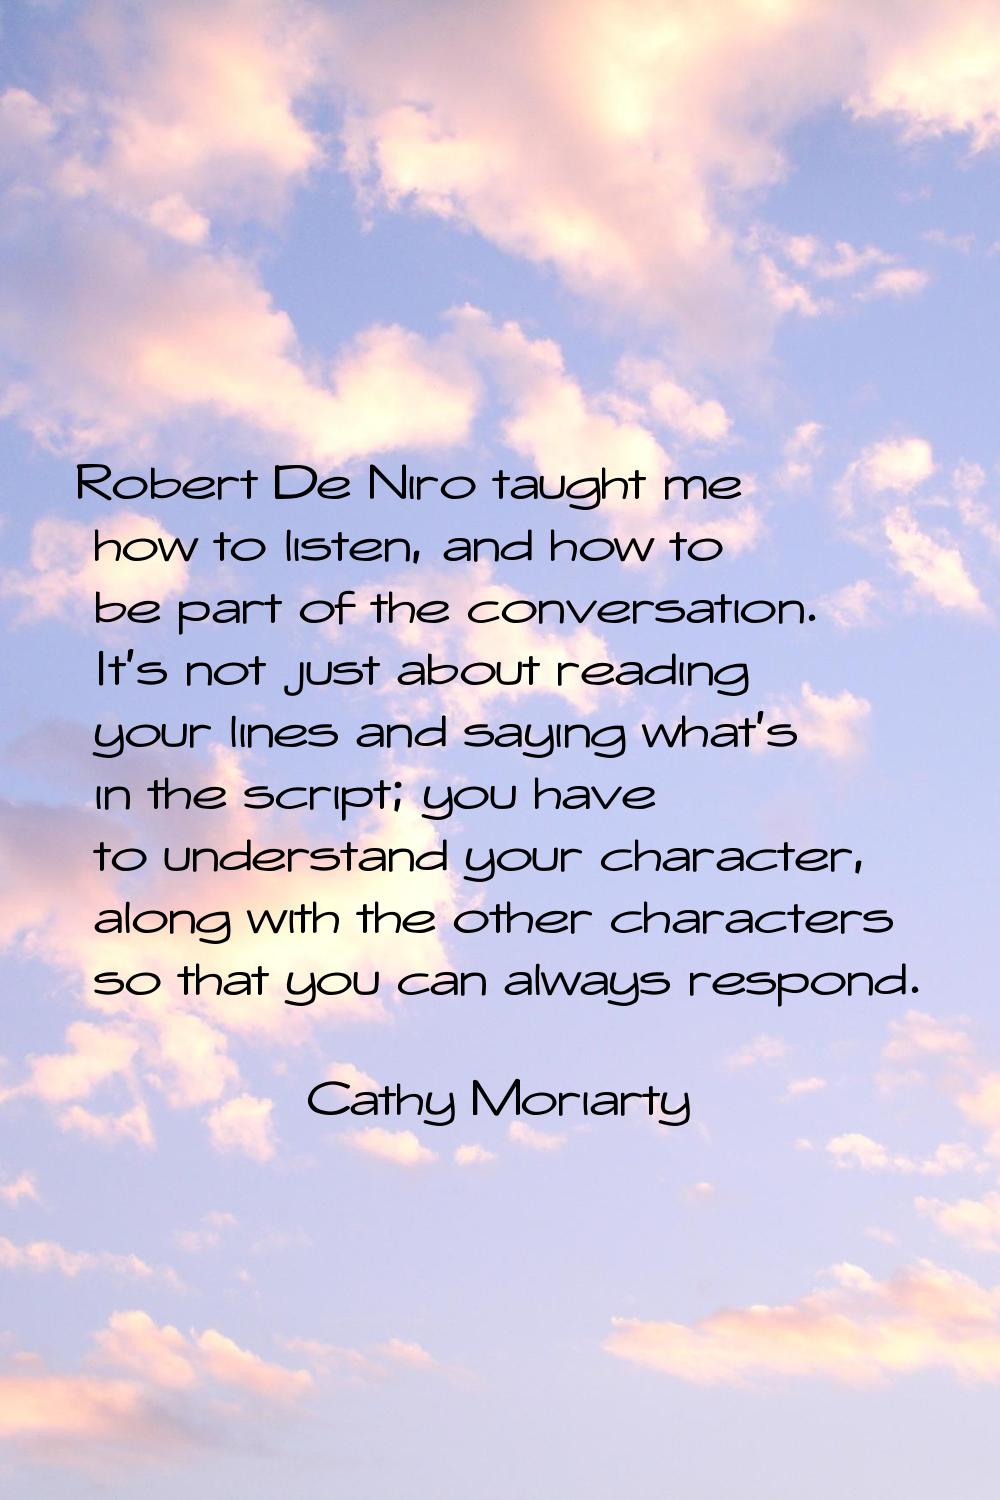 Robert De Niro taught me how to listen, and how to be part of the conversation. It's not just about